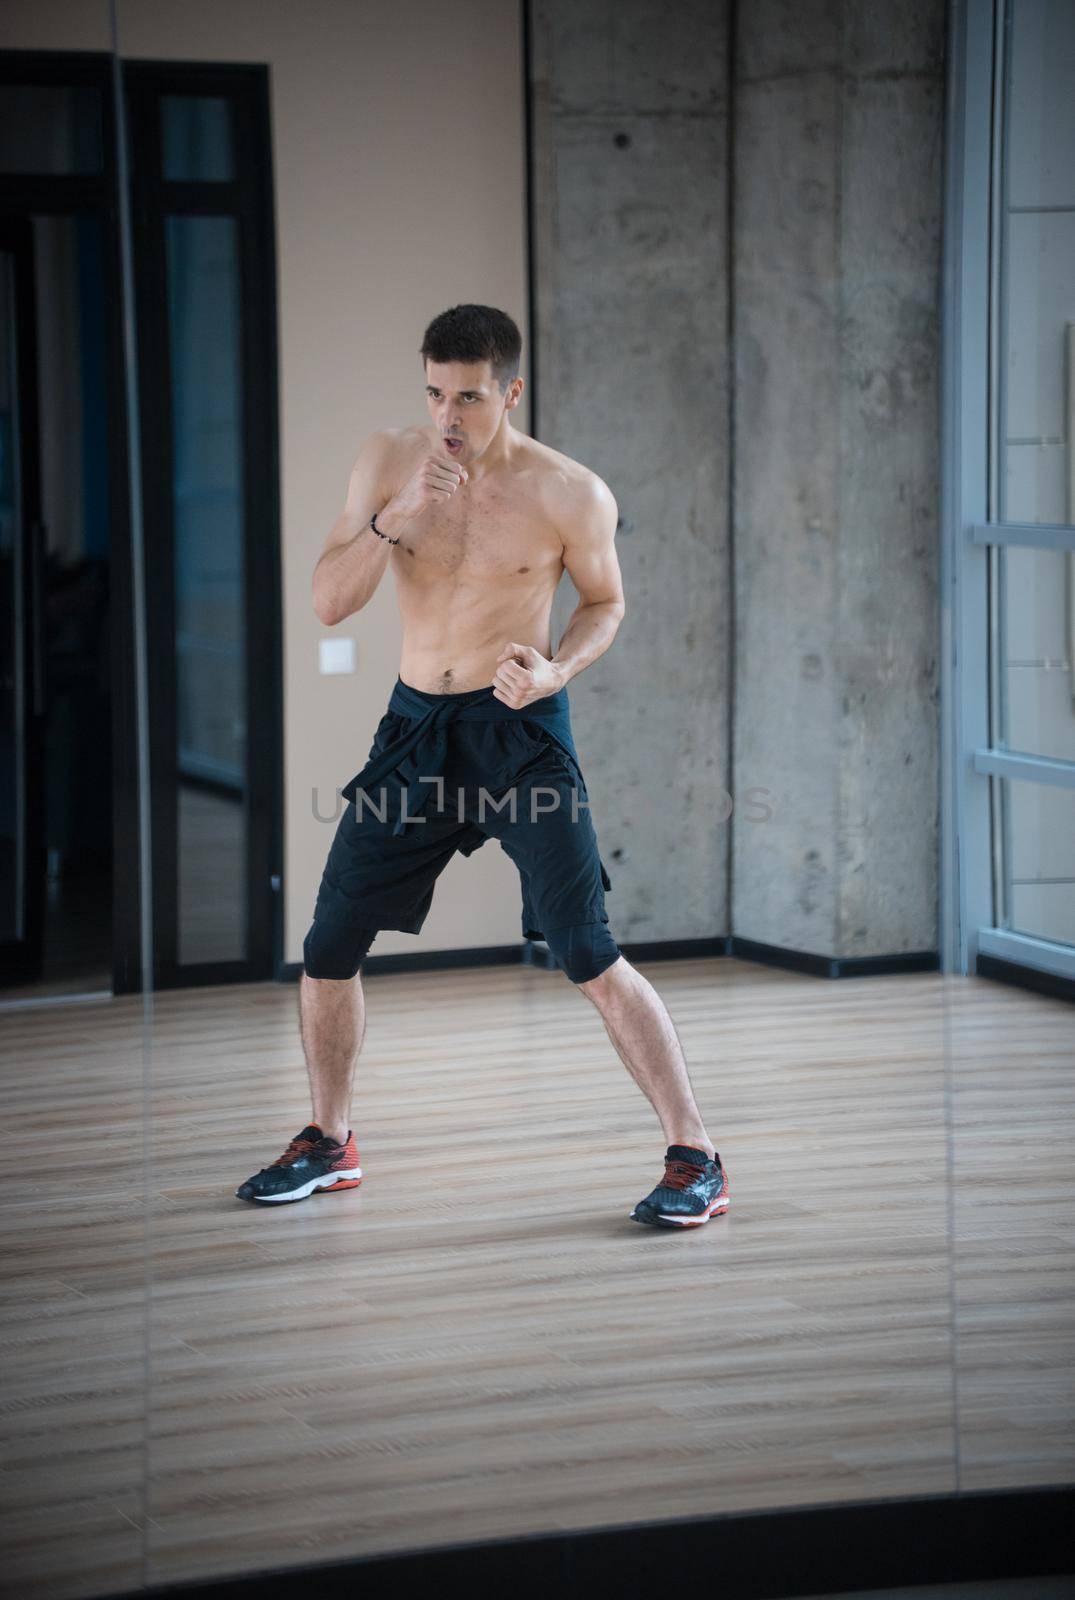 An athletic young man boxer standing in fighting pose in the bright studio. Mid shot